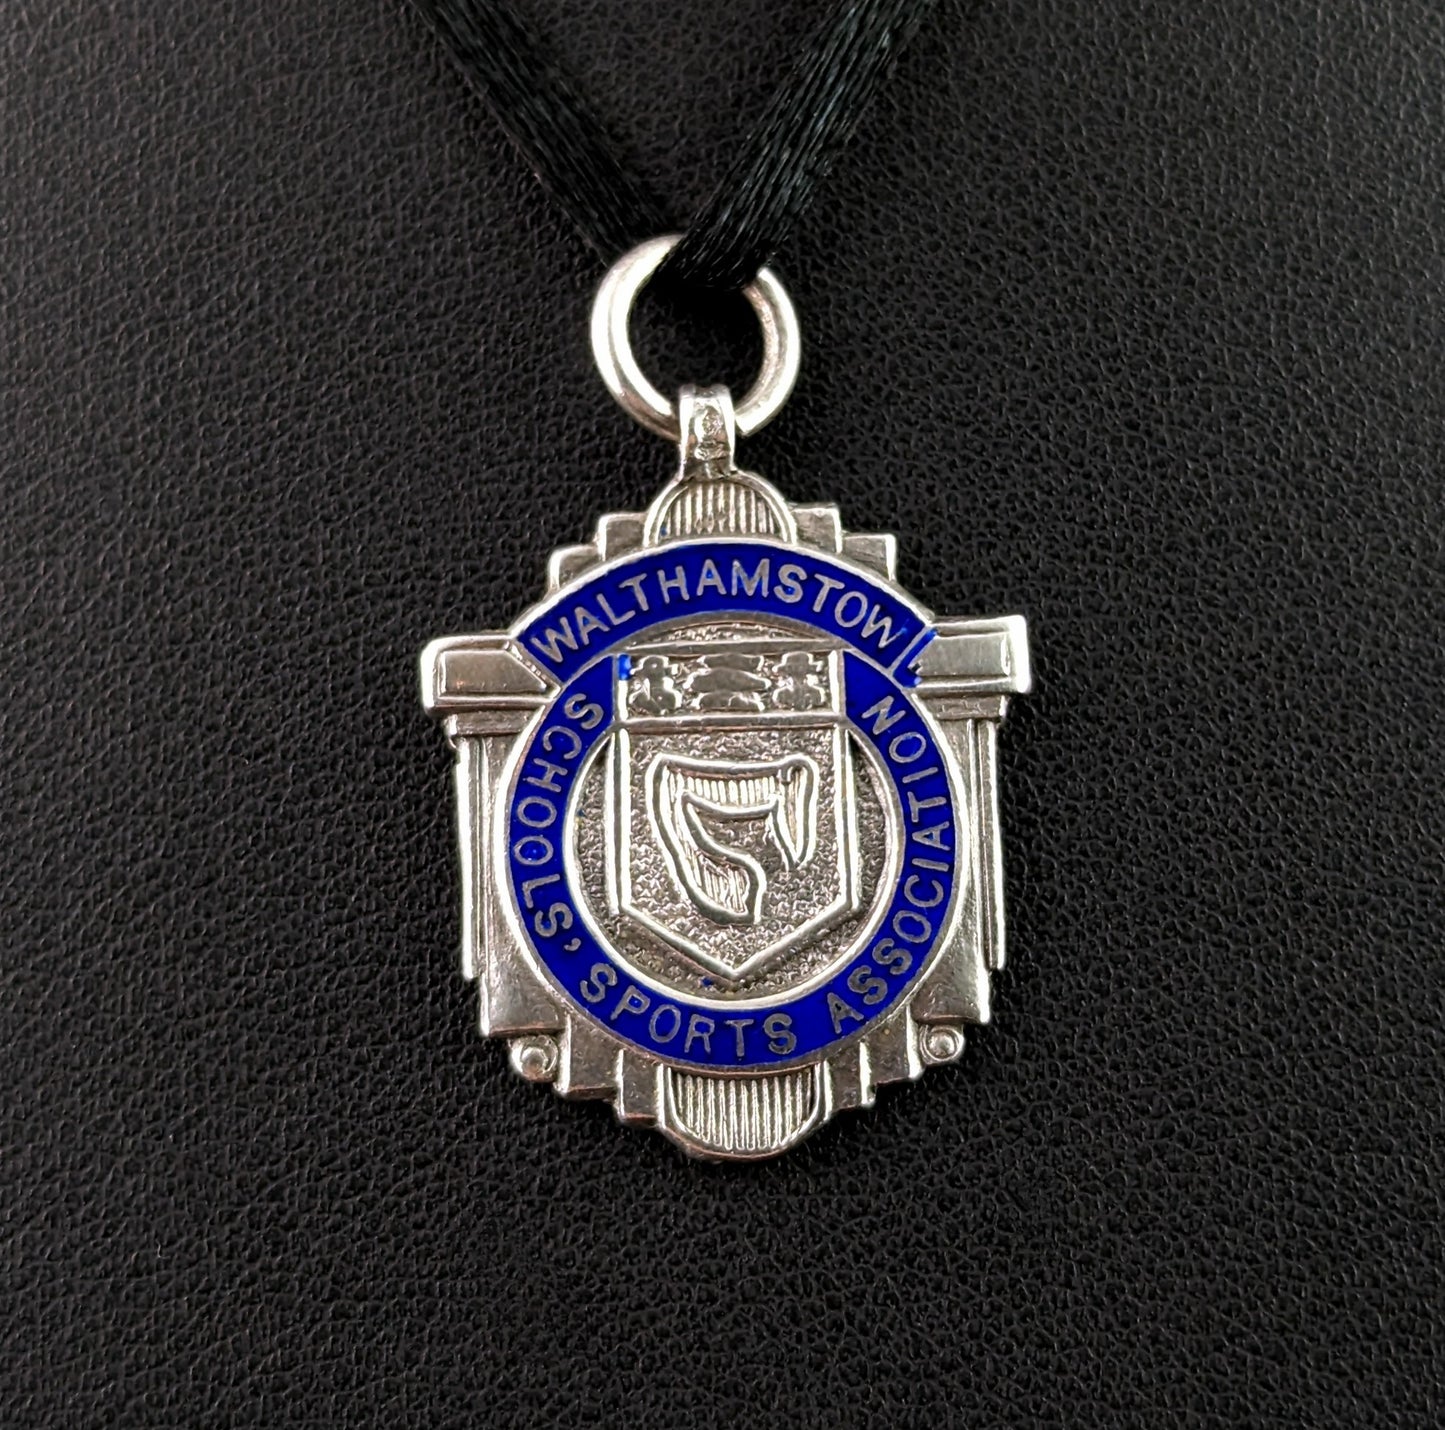 Vintage sterling silver and blue enamel fob pendant, Sports